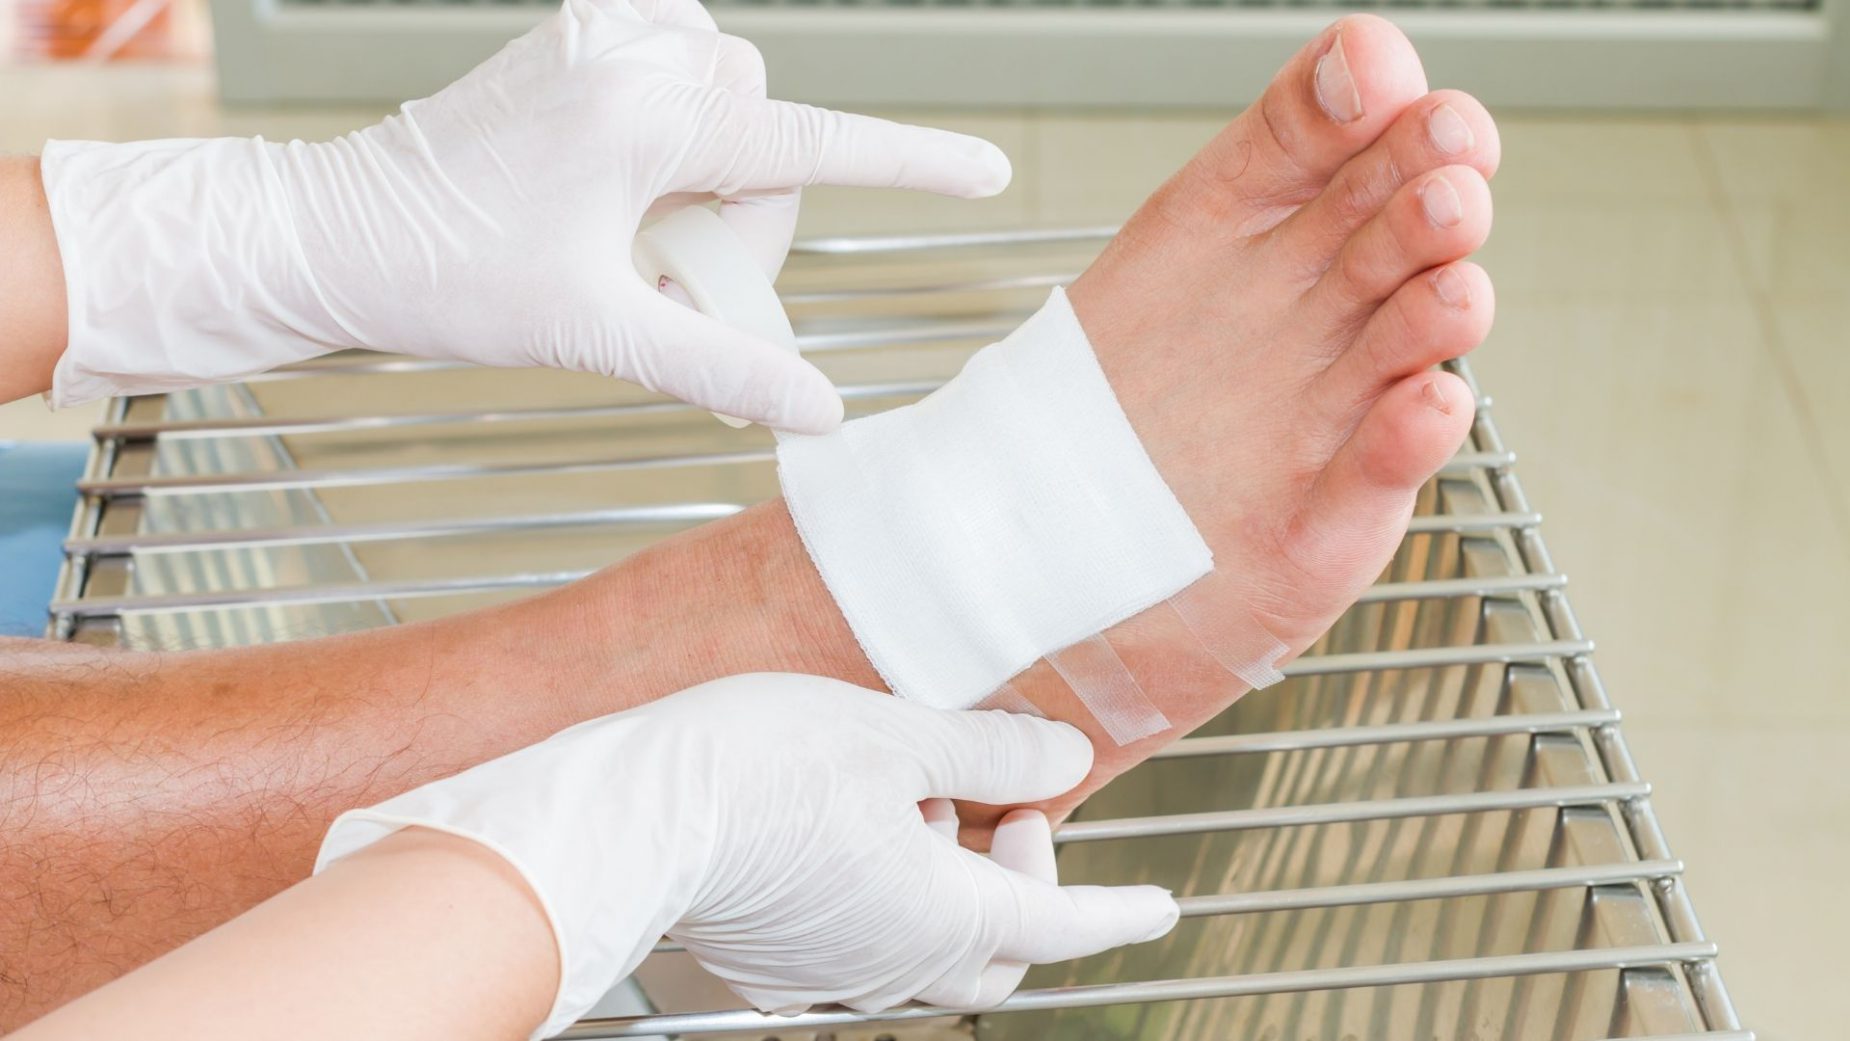 Global Wound Care Devices Market Overview And Prospects